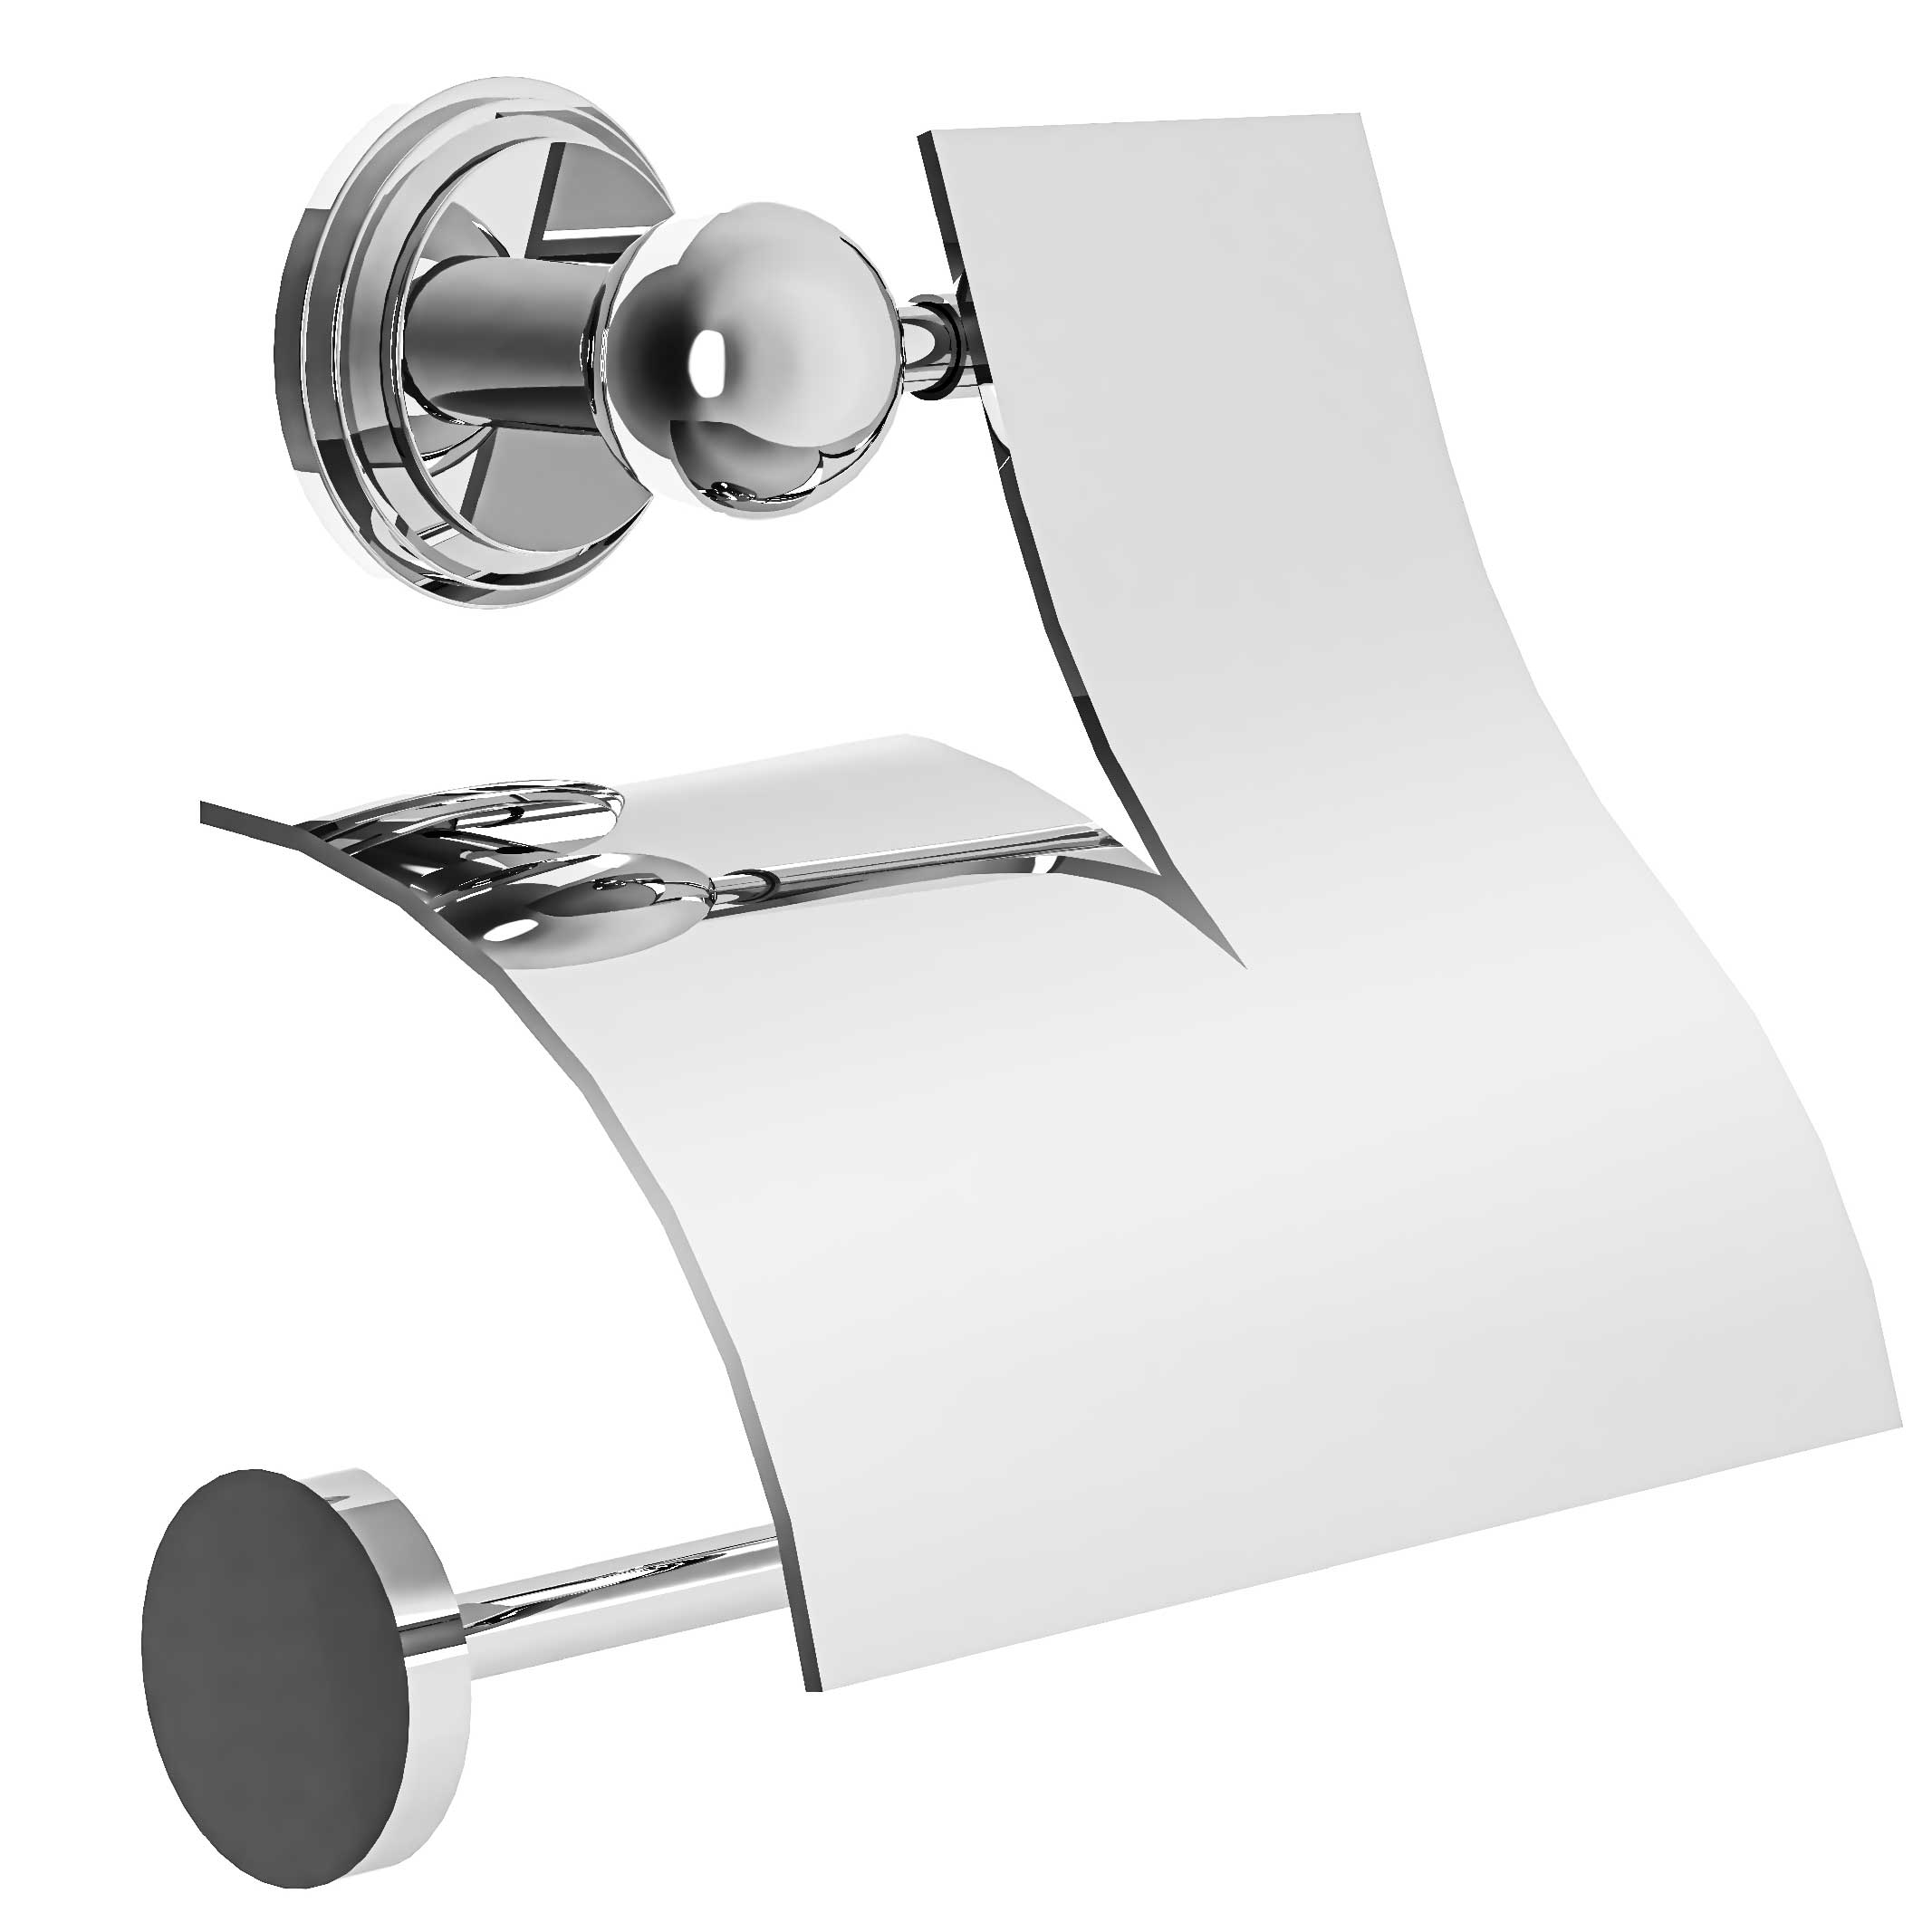 M60-503 Toilet roll holder with cover